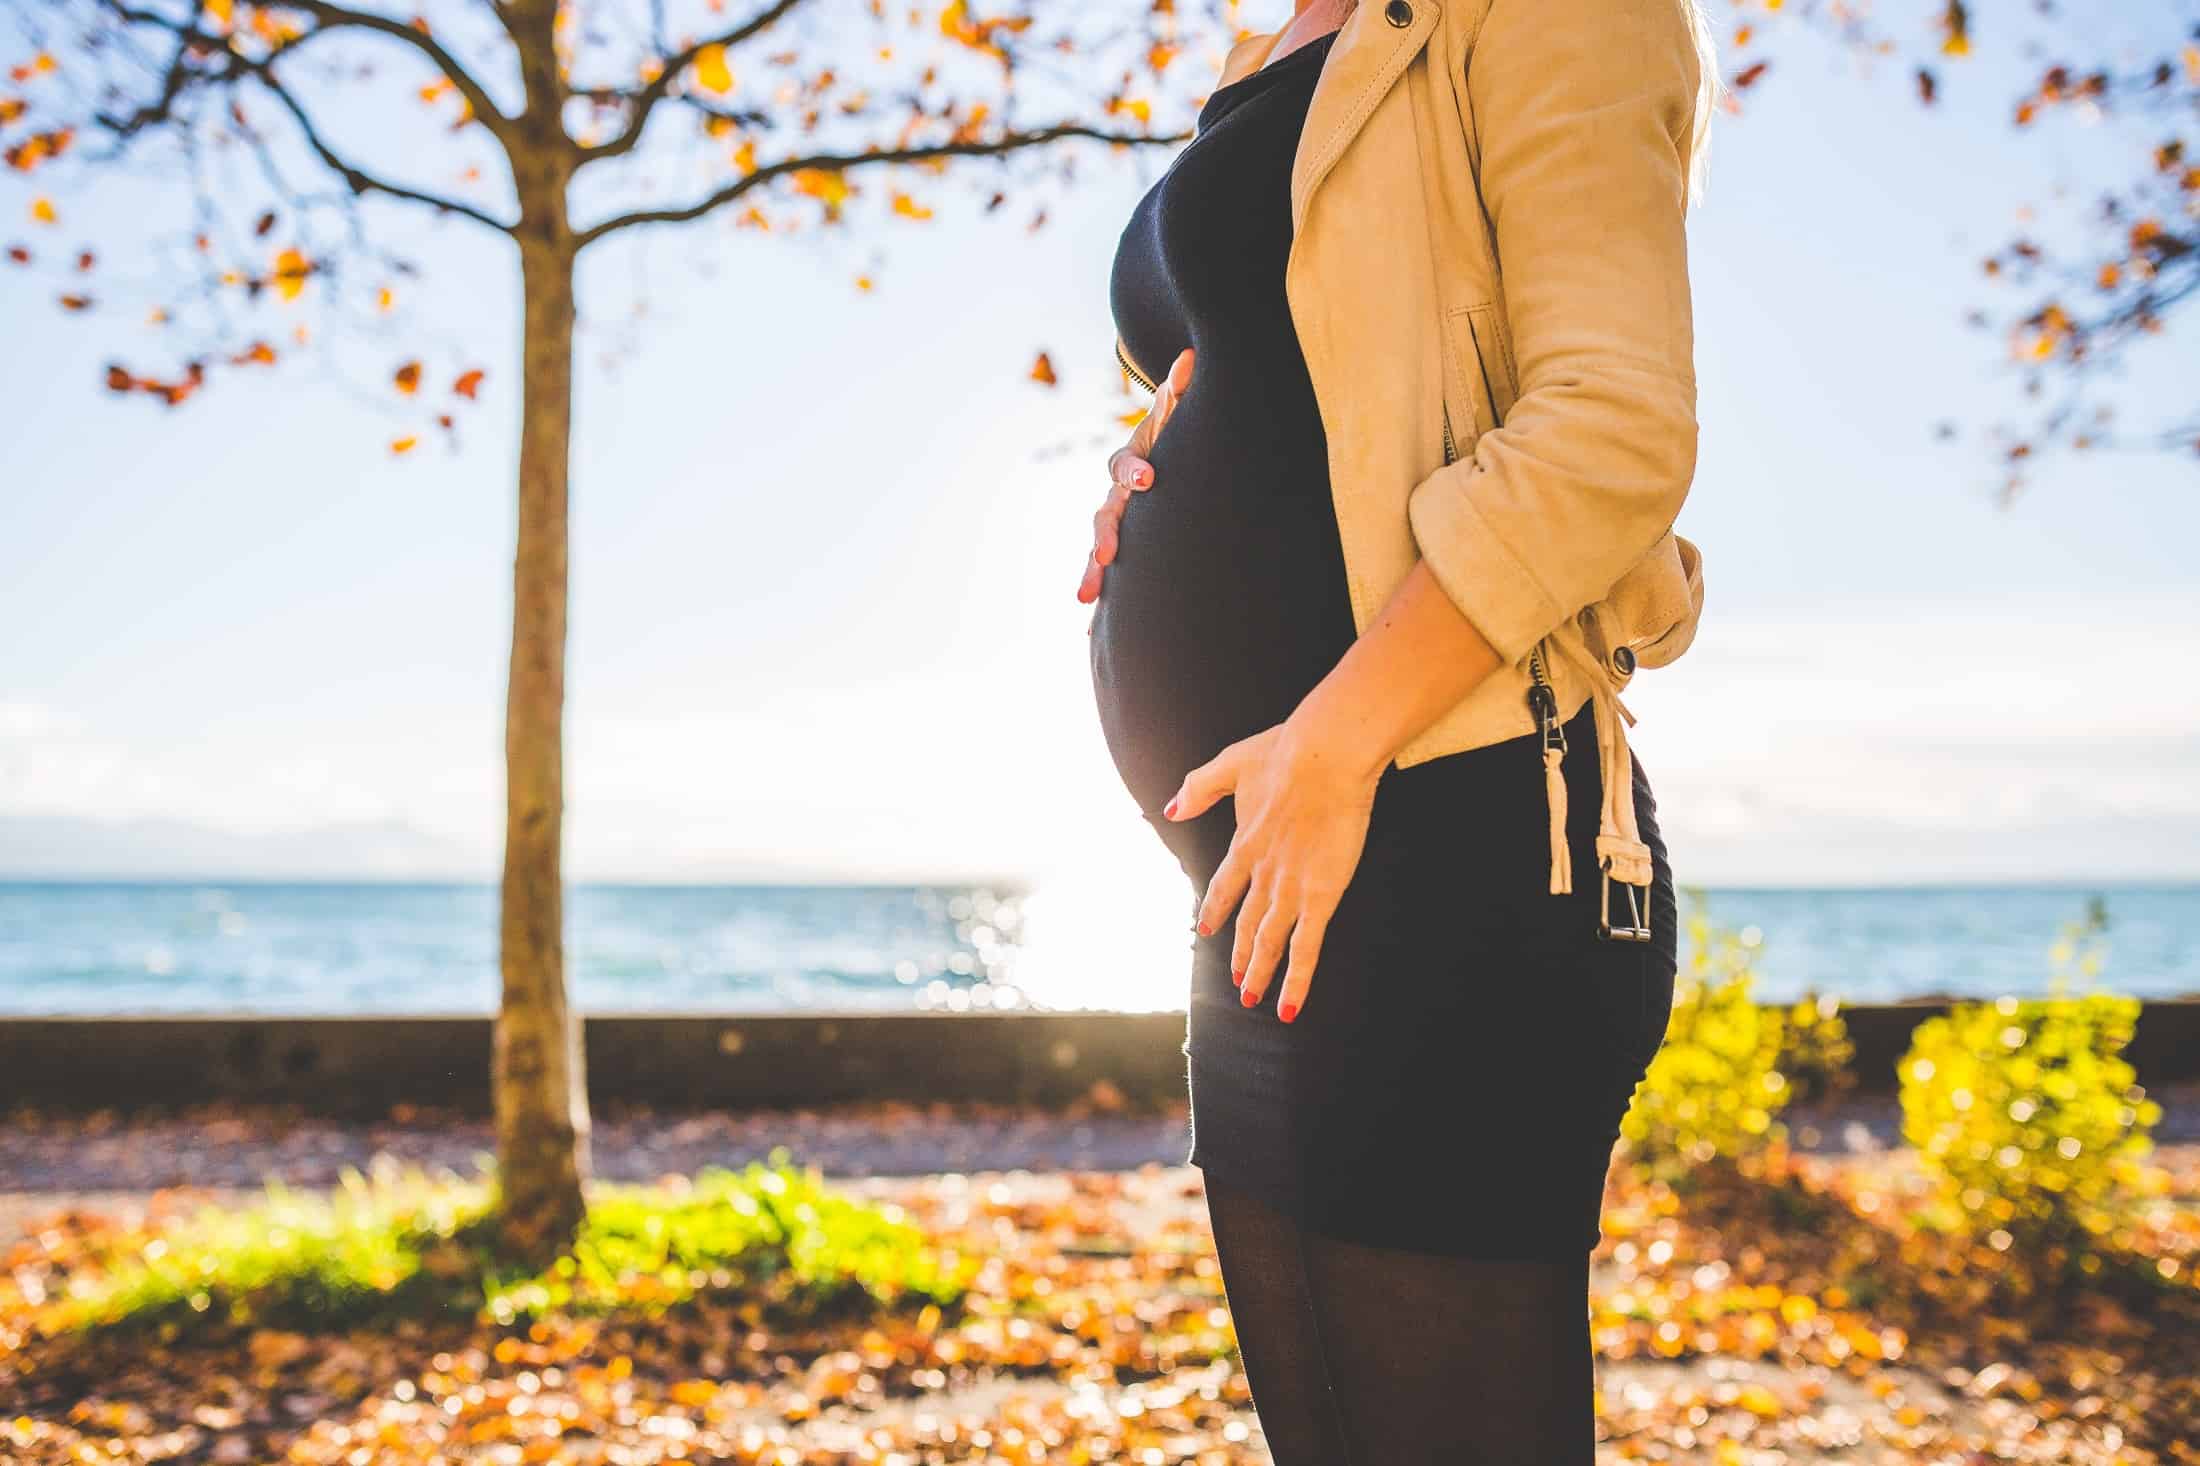 Fluctuating moods during pregnancy – do you know how to deal with them?